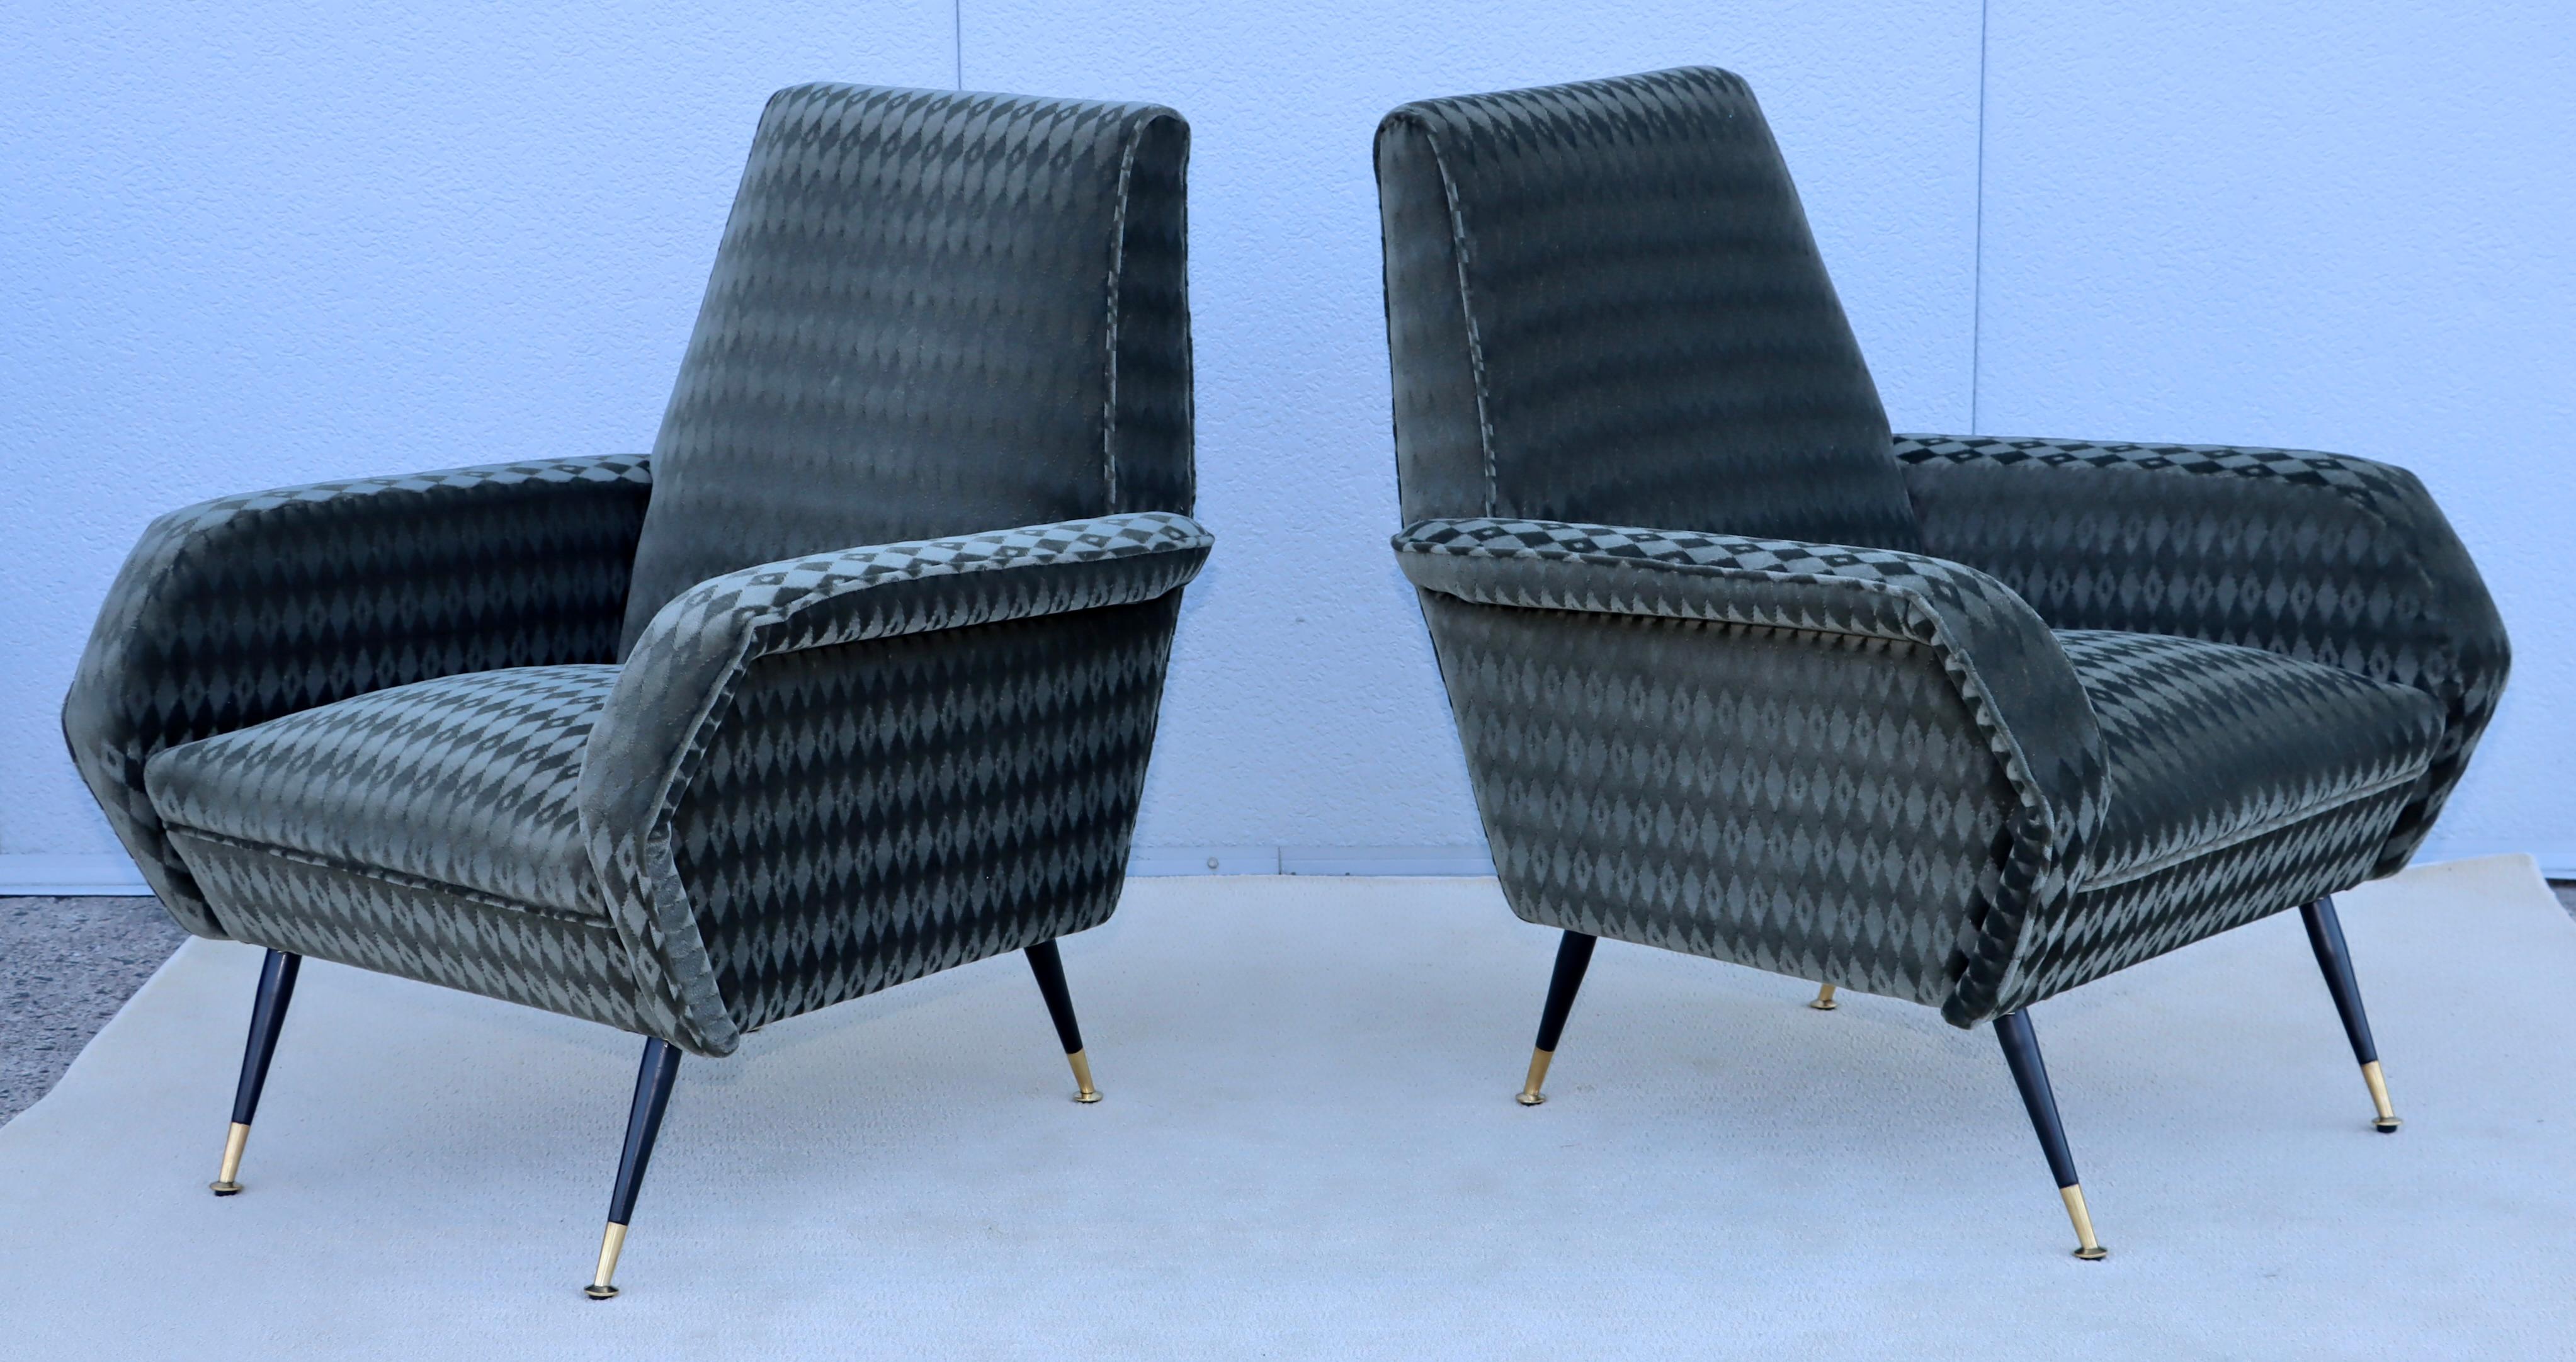 Brass 1950's Mid-Century Modern Italian Lounge Chairs With Donghia Mohair Upholstery For Sale